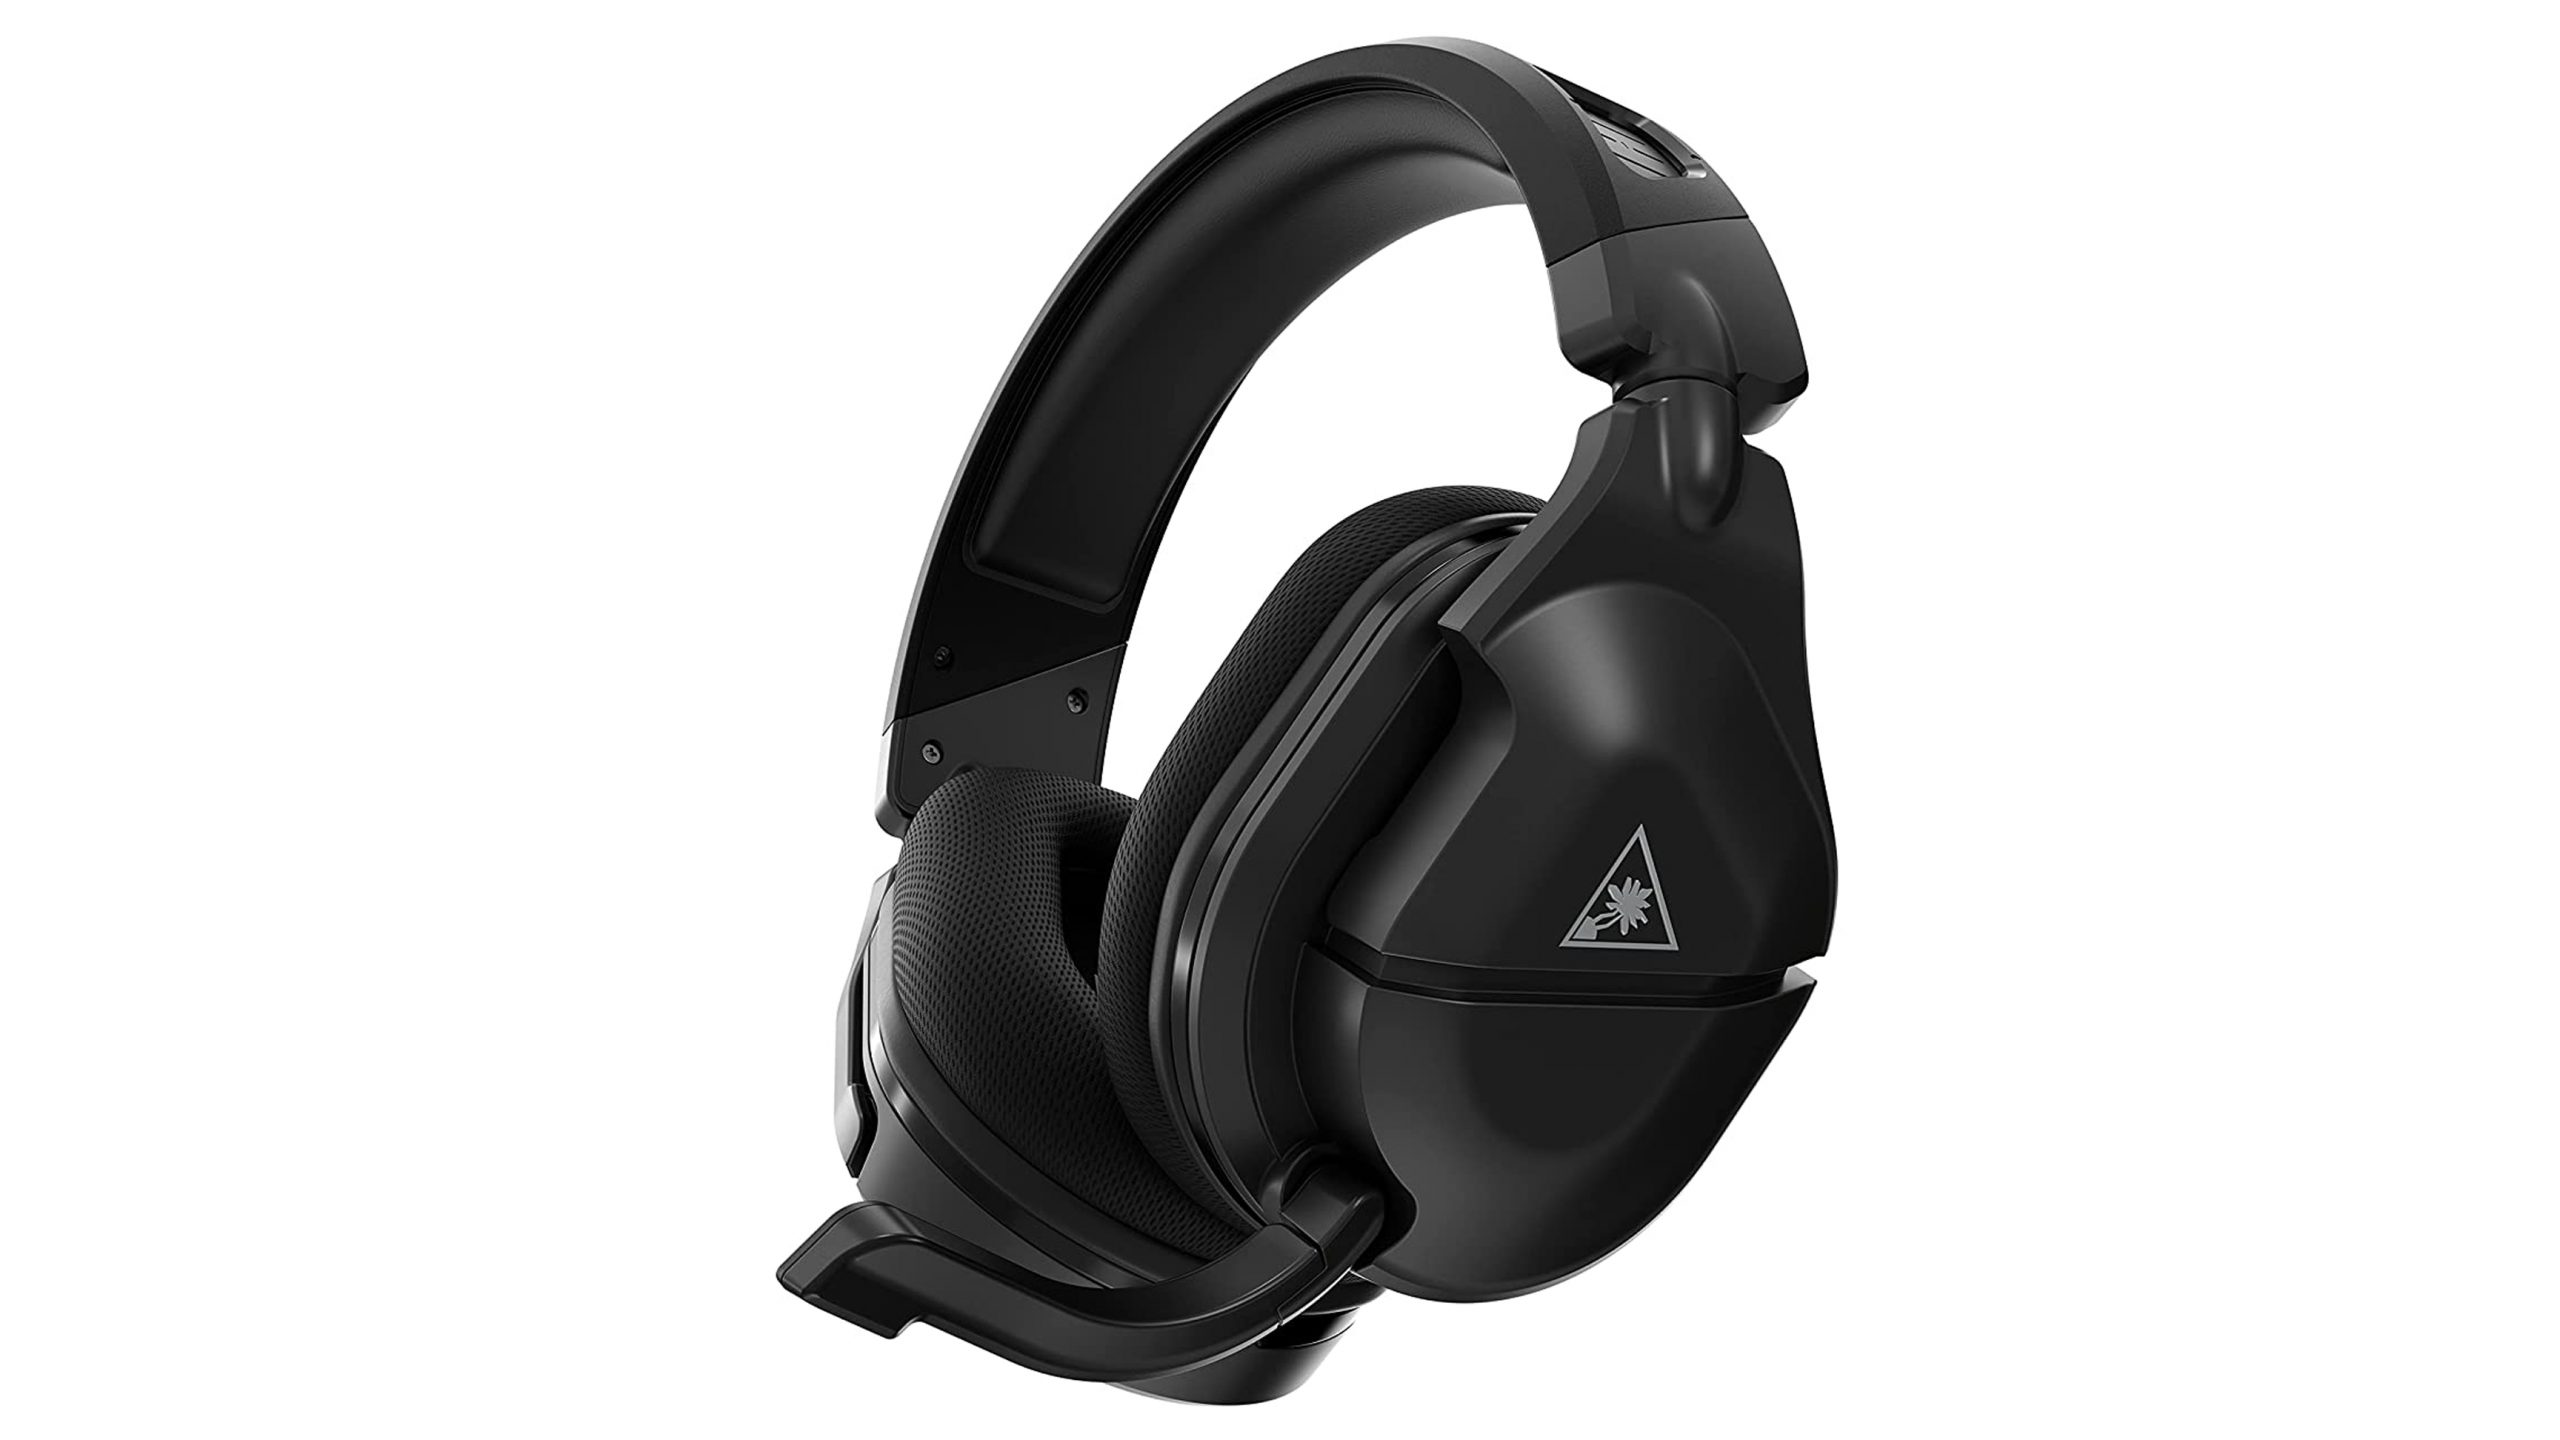 Product image of Turtle Beach Stealth 600 gen. 2 MAX headphones on a white background